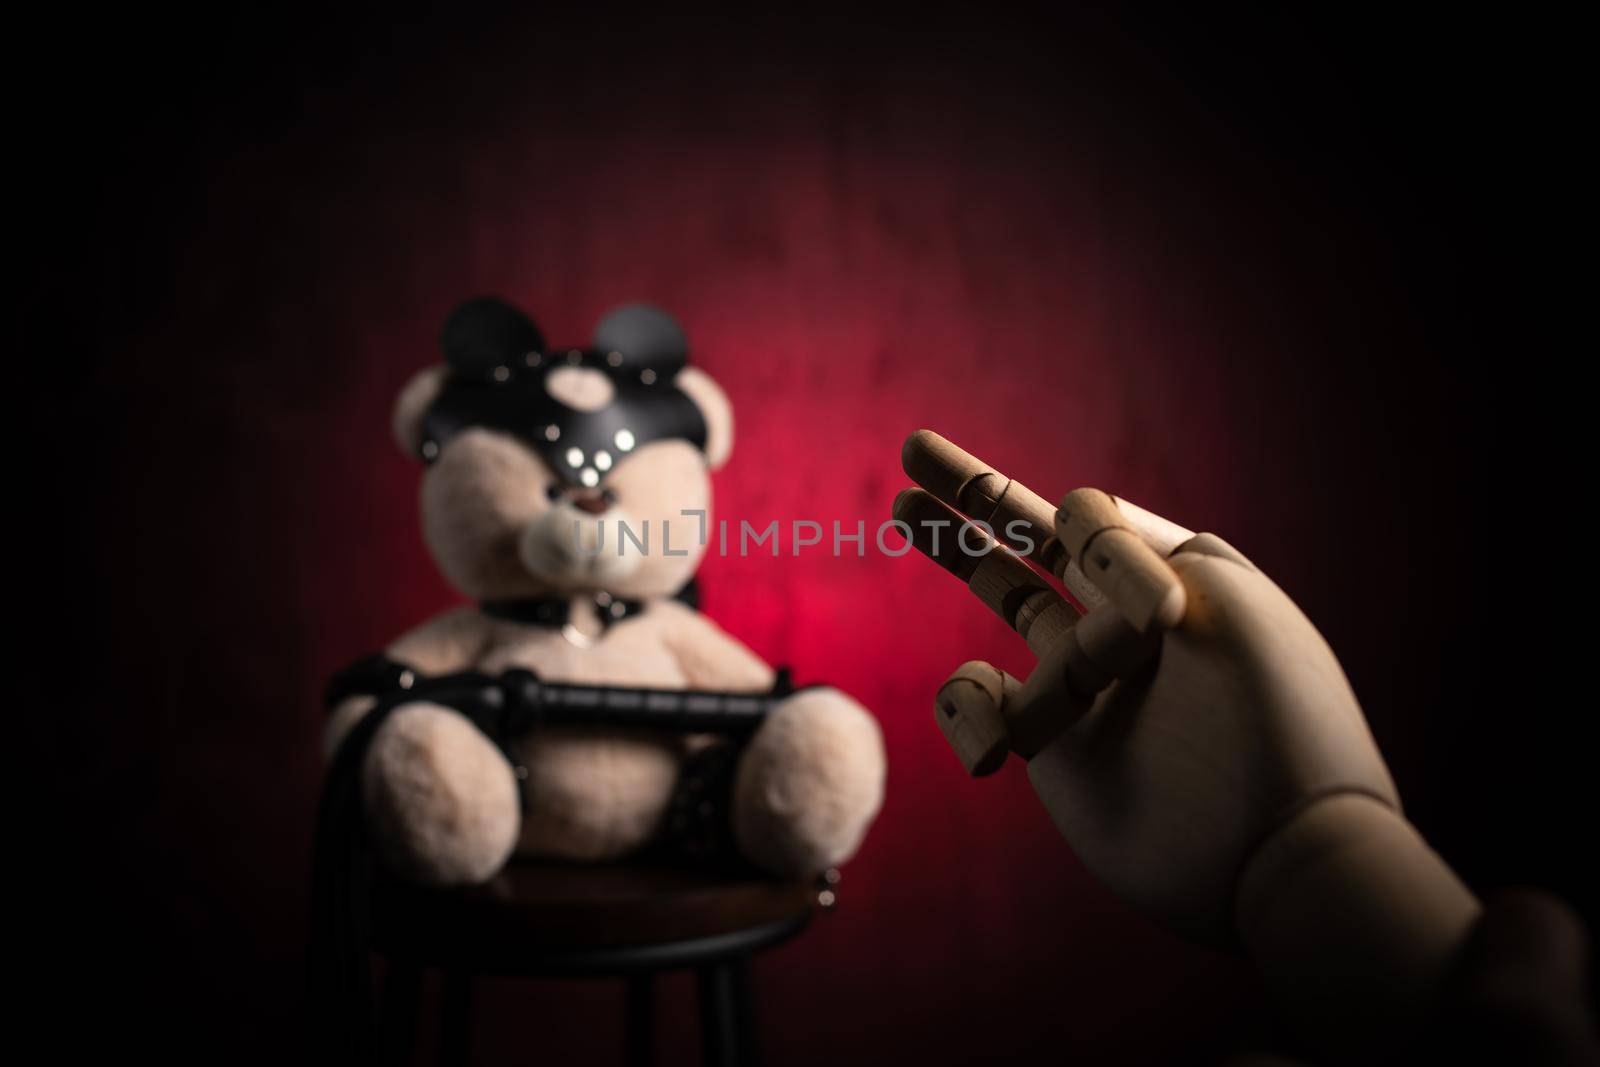 a toy teddy bear with a whip, dressed in leather belts and a mask, an accessory for BDSM games with a wooden hand and a sexual gesture by Rotozey